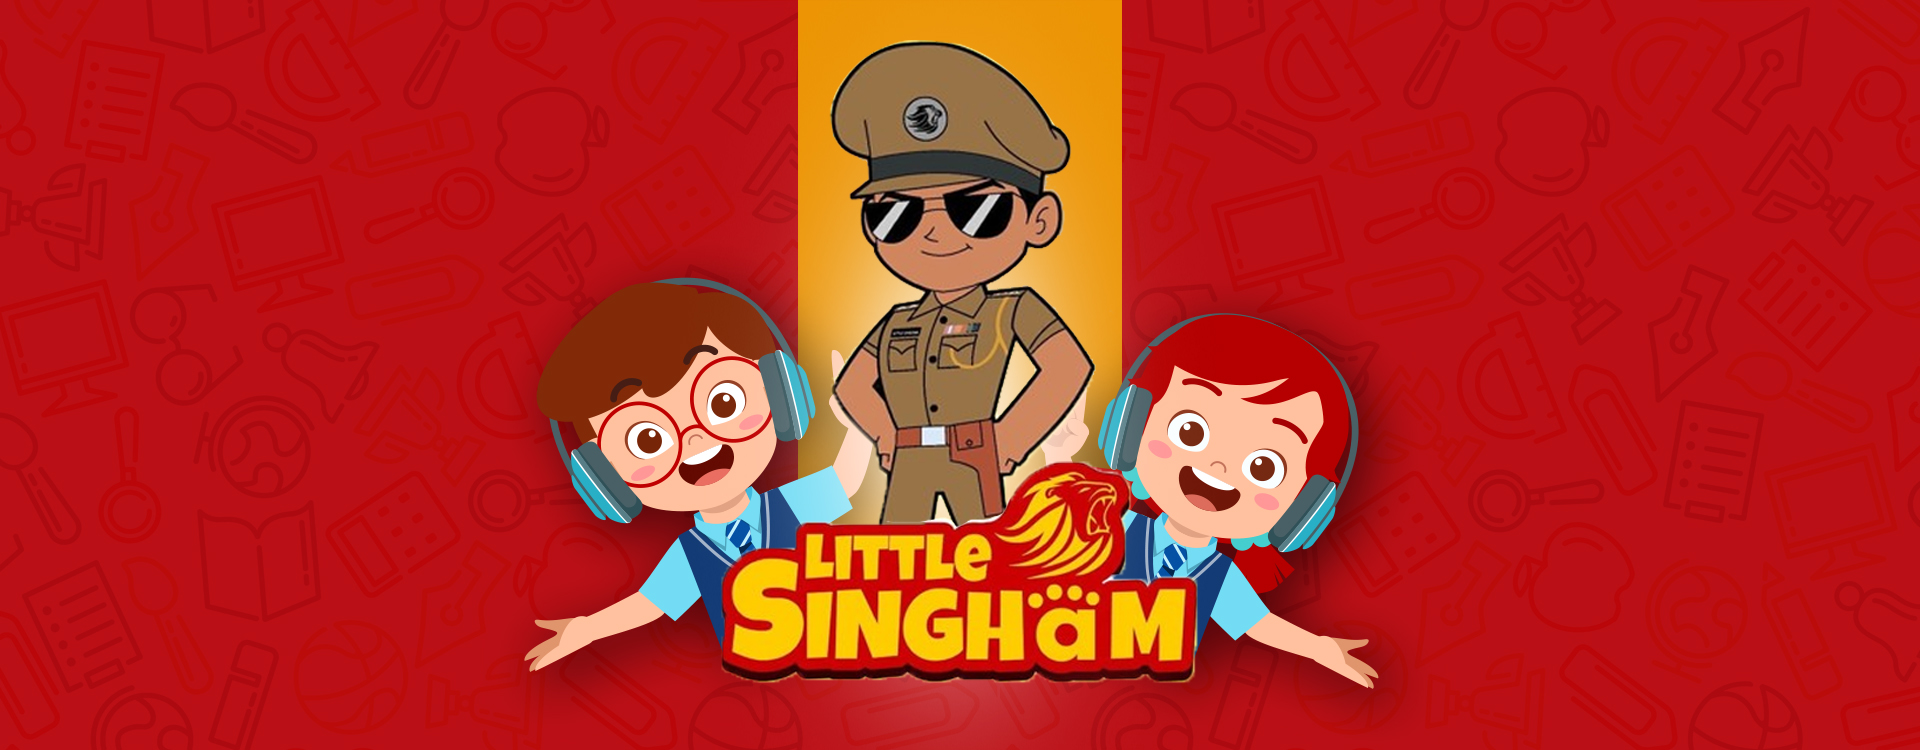 Little Singham is a character-based early learning app for kids.